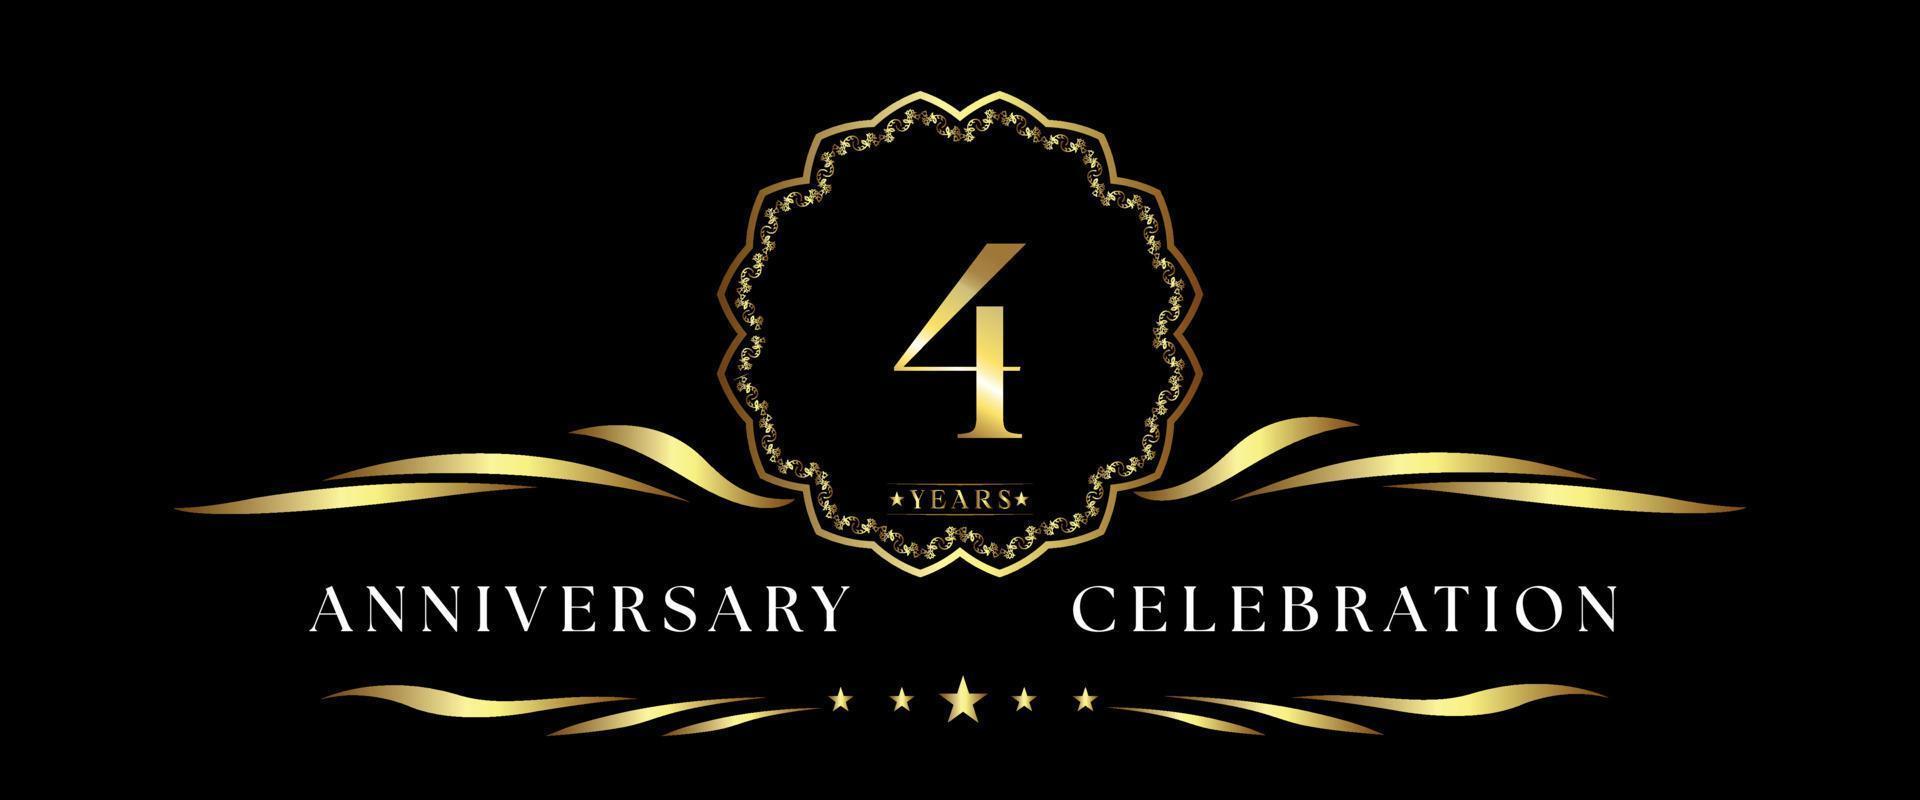 4 years anniversary celebration with gold decorative frame isolated on black background. Vector design for greeting card, birthday party, wedding, event party, ceremony. 4 years Anniversary logo.